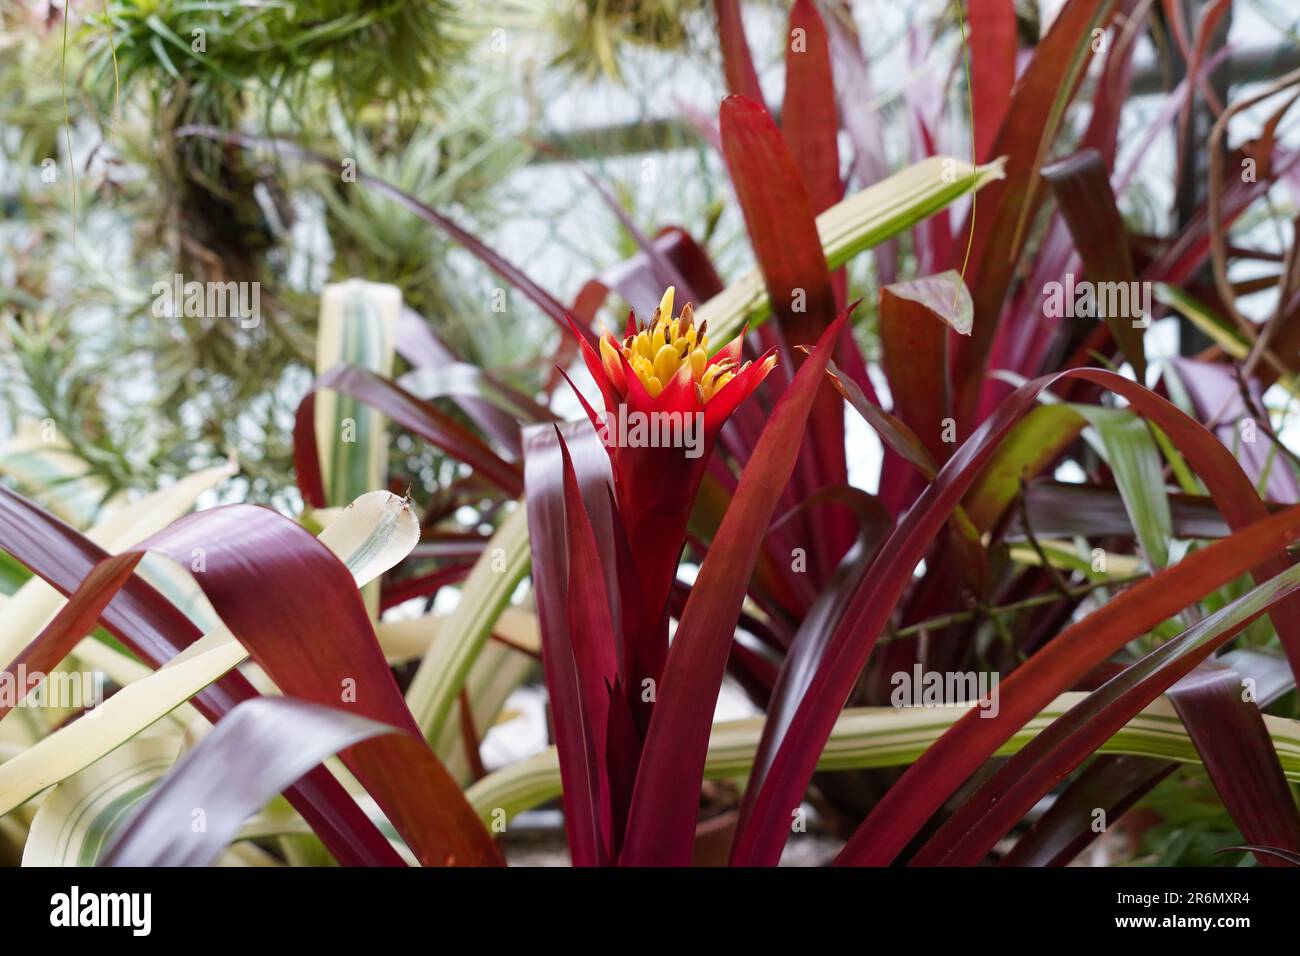 Guzmania hybride cv. Symphonie is a  species of flowering plants in the botanical family Bromeliaceae, subfamily Tillandsioideae. Stock Photo